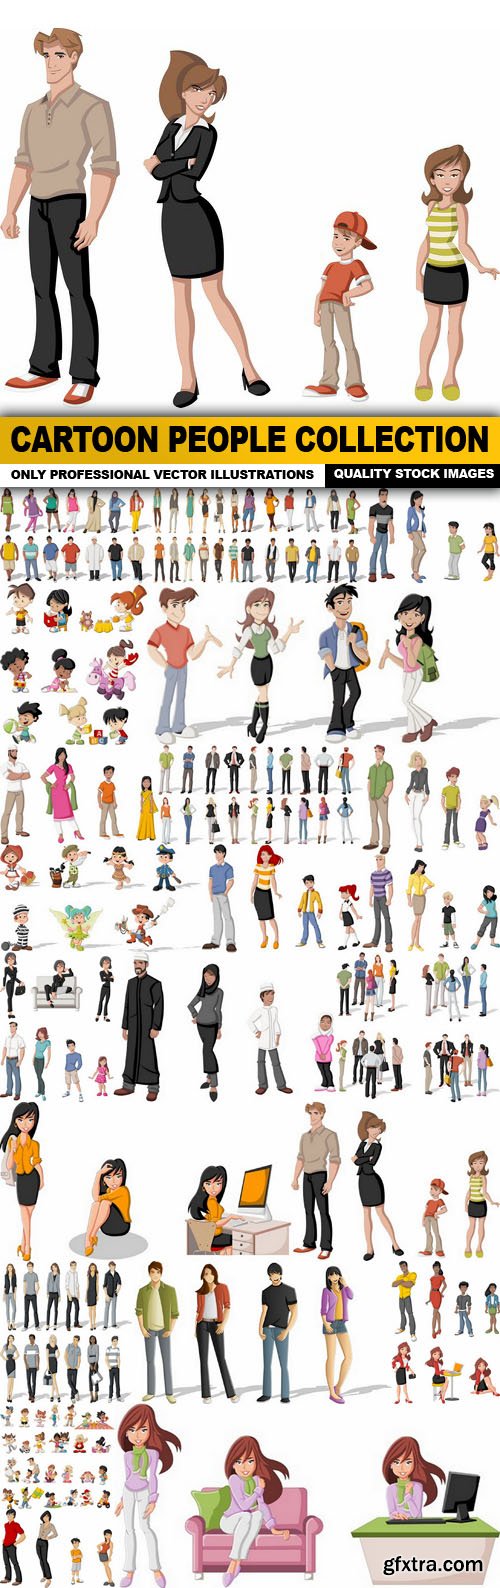 Cartoon People Collection - 25 Vector